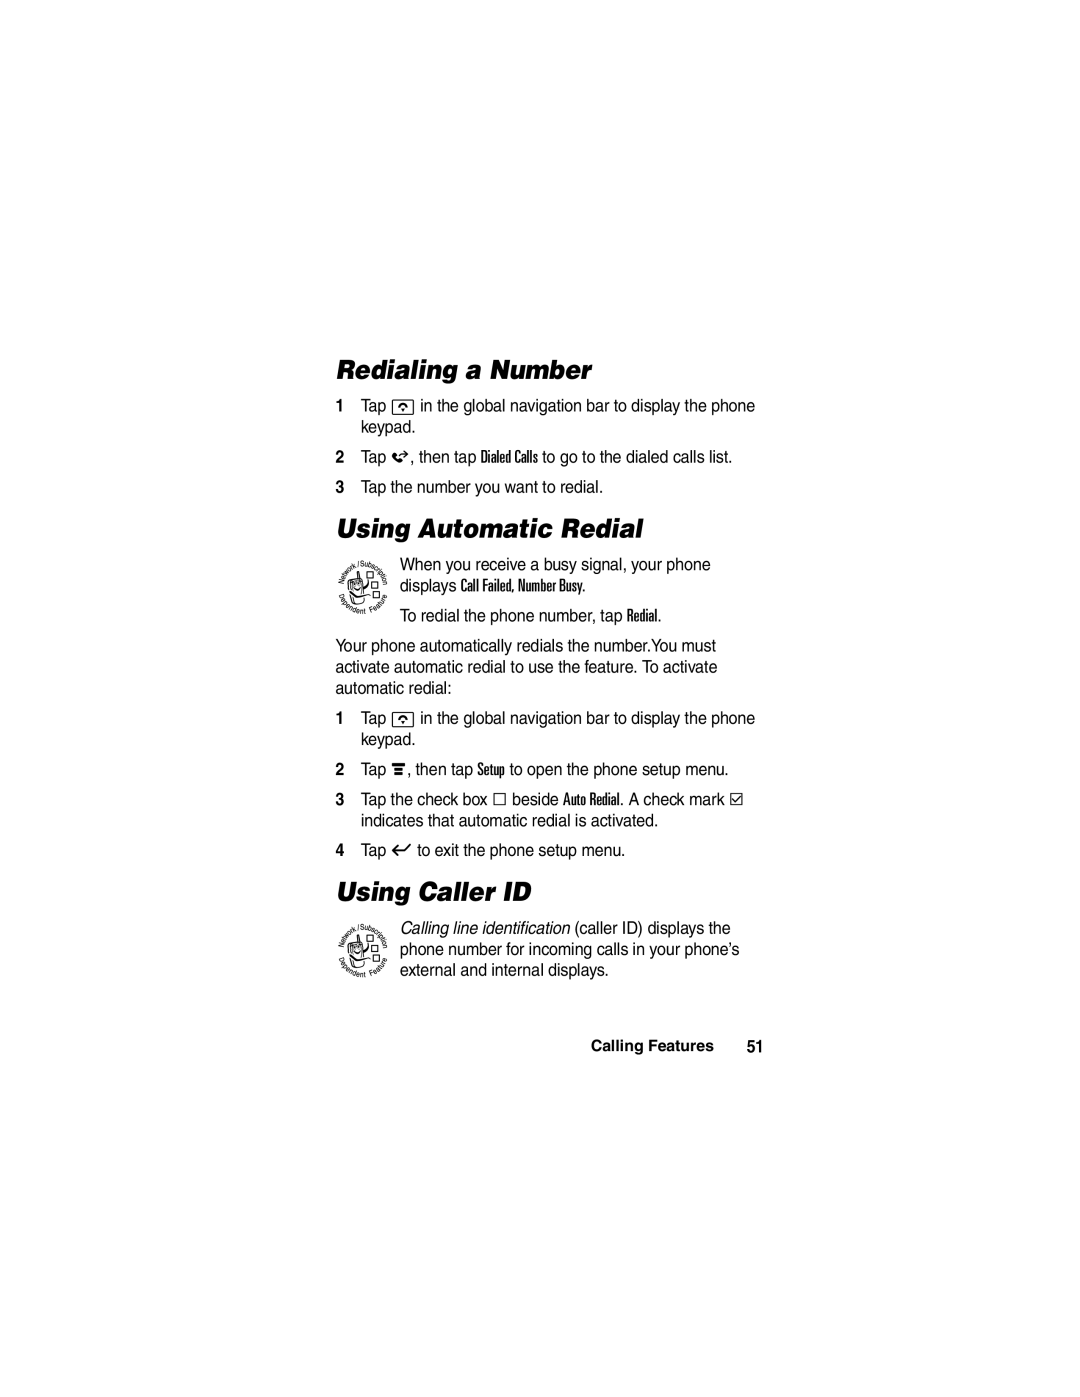 Motorola A780 manual Redialing a Number, Using Automatic Redial, Using Caller ID, Calling Features 